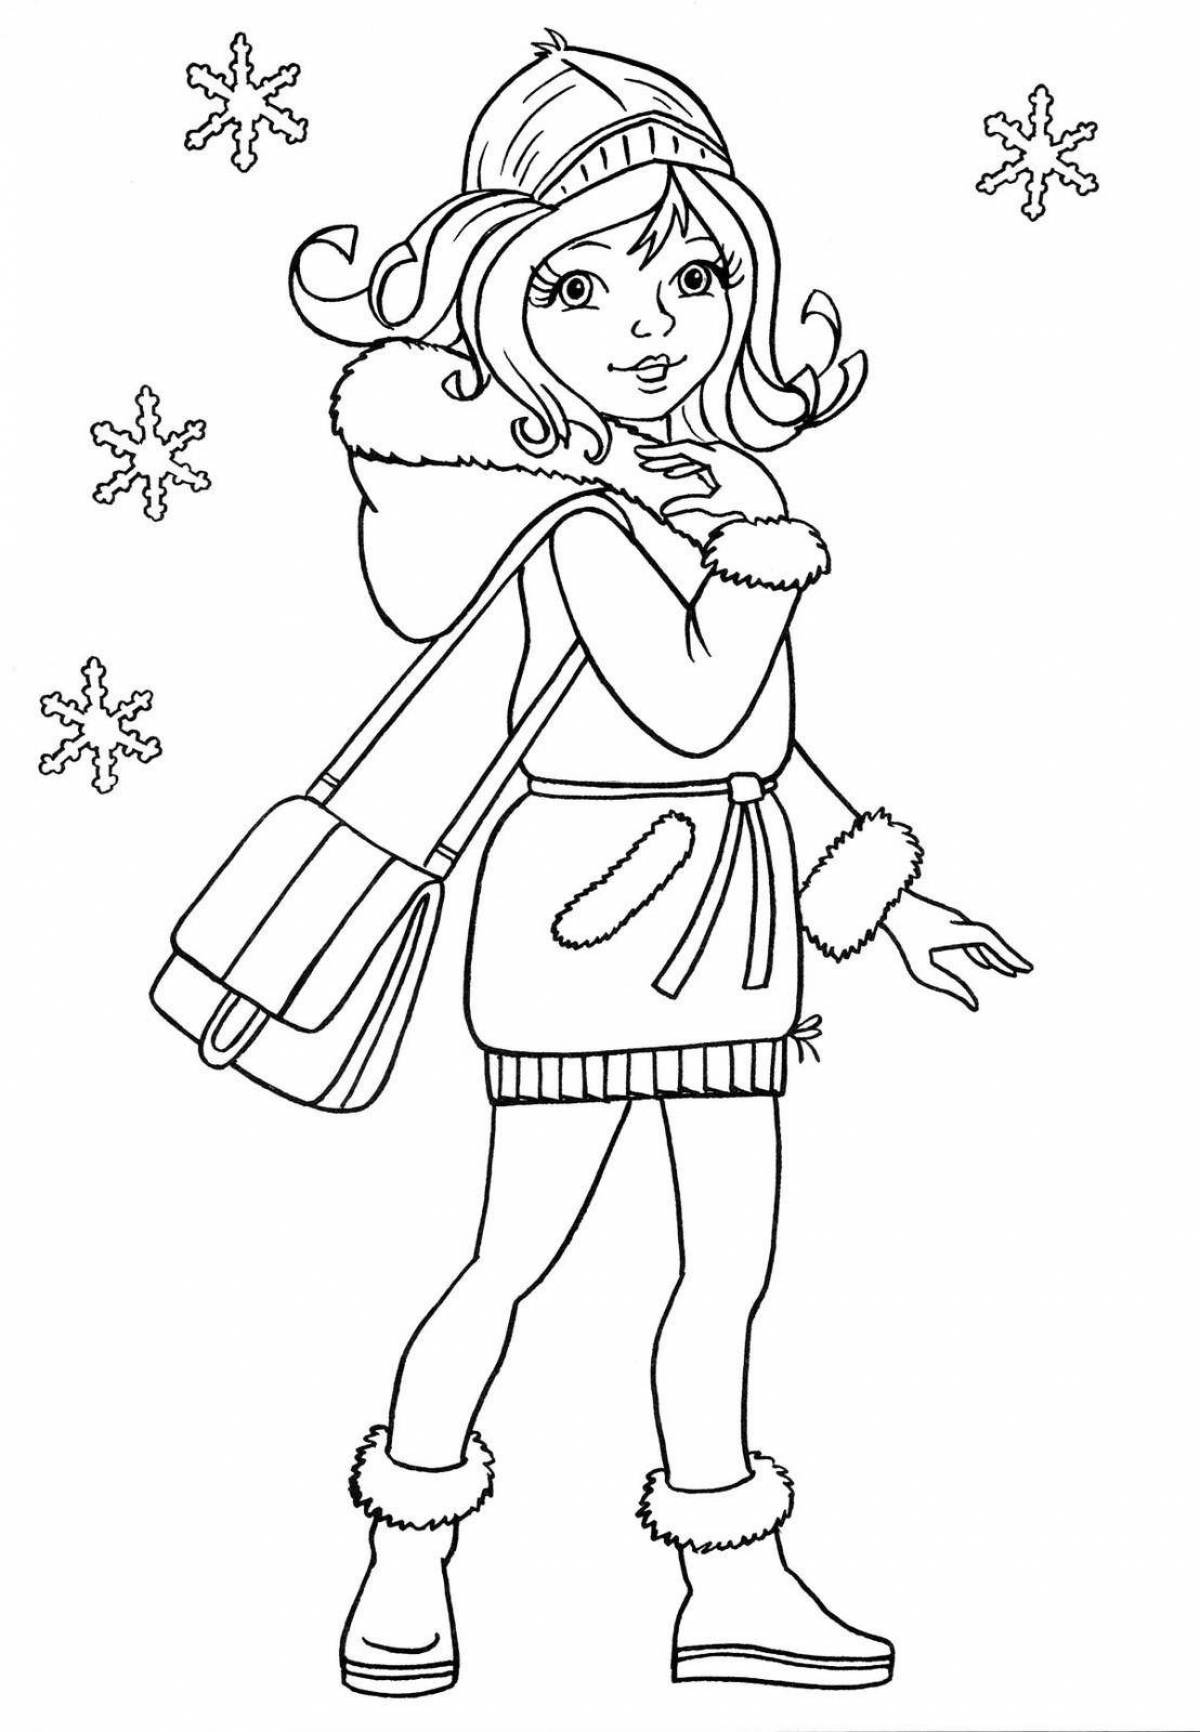 Live coloring girl in winter clothes